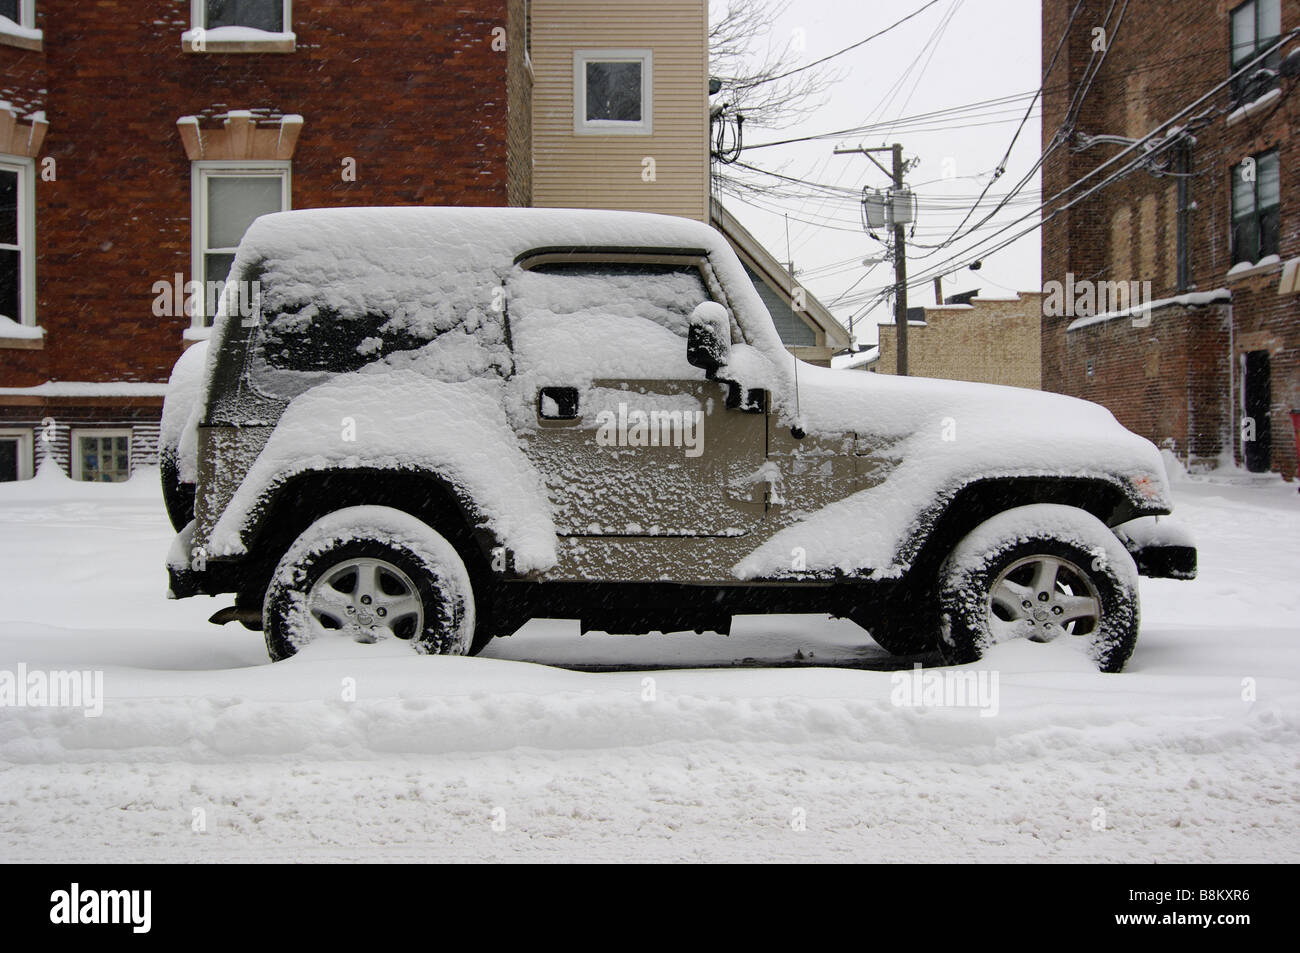 A Jeep Wrangler 4x4 SUV frozen on a city street covered in snow and ice. Stock Photo